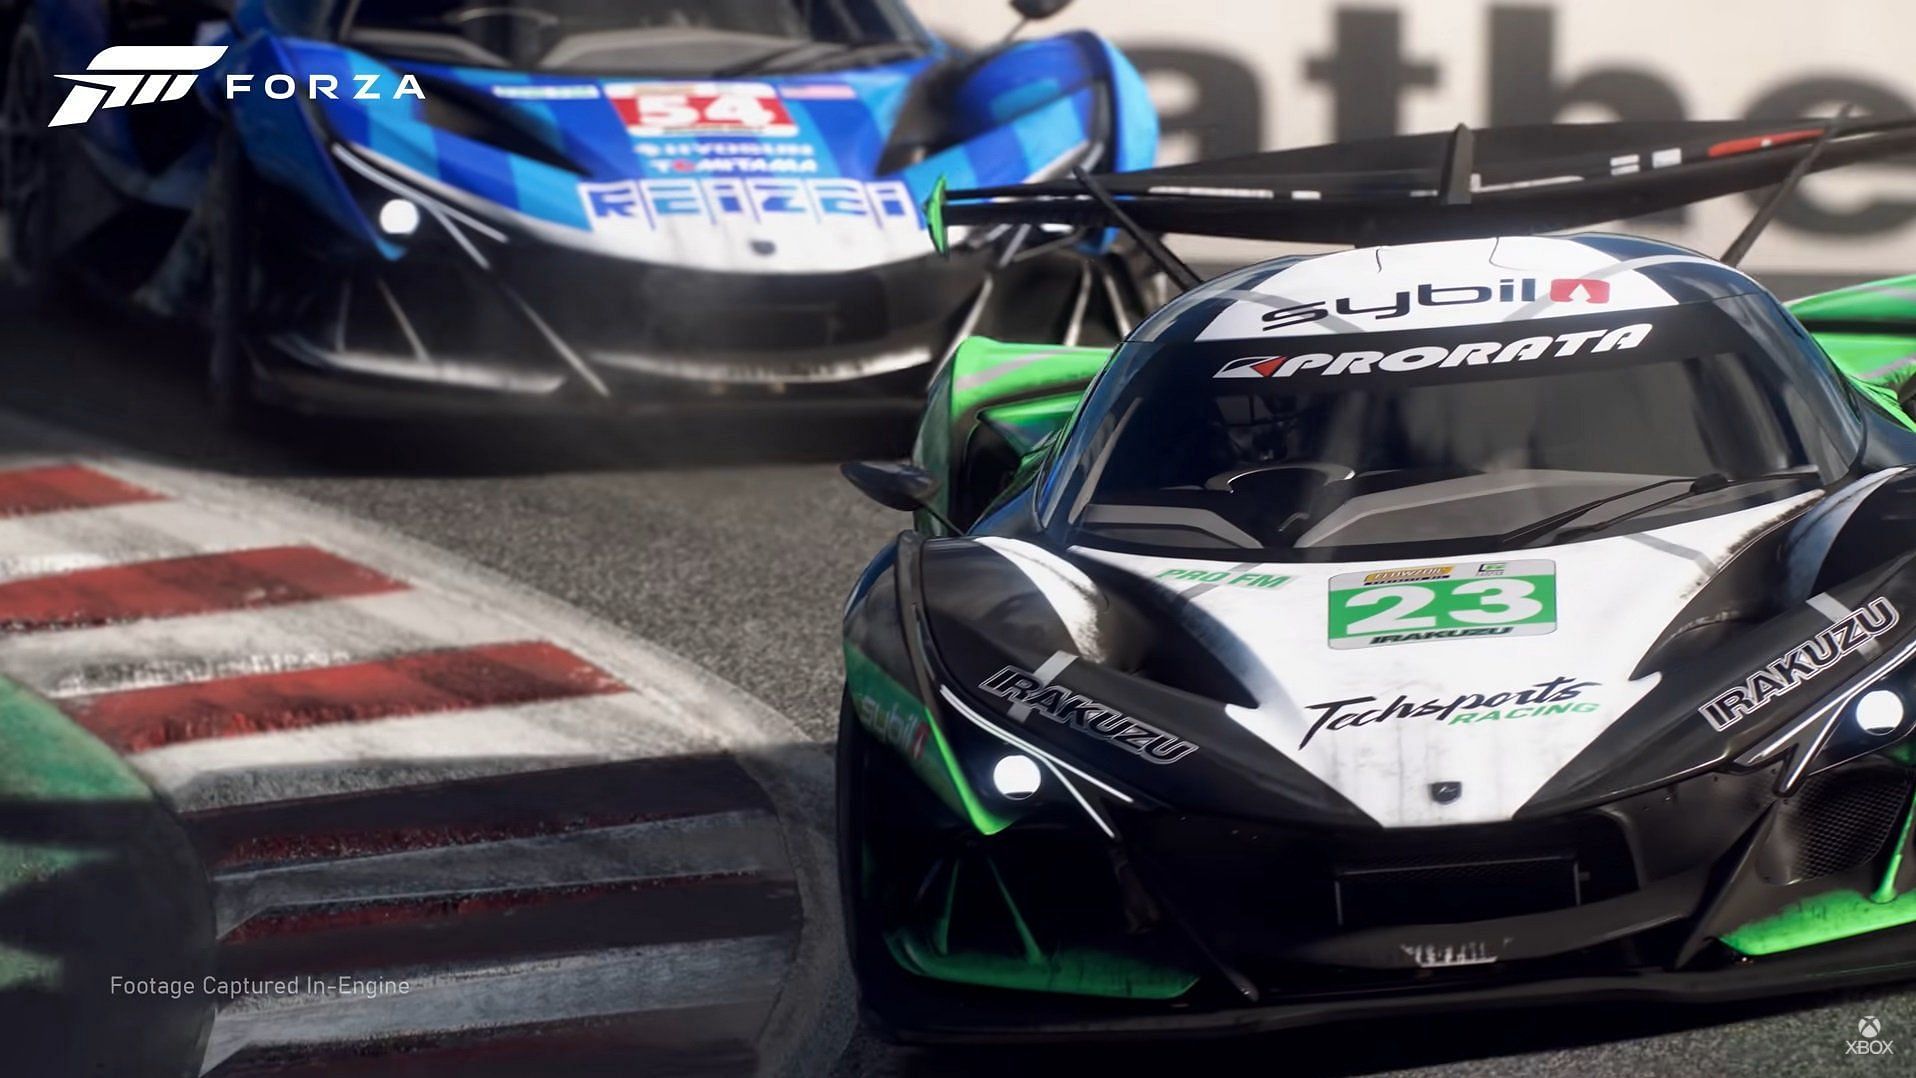 Forza Motorsport 8 is in development for Xbox consoles and PC (Image via Turn 10 Studios)